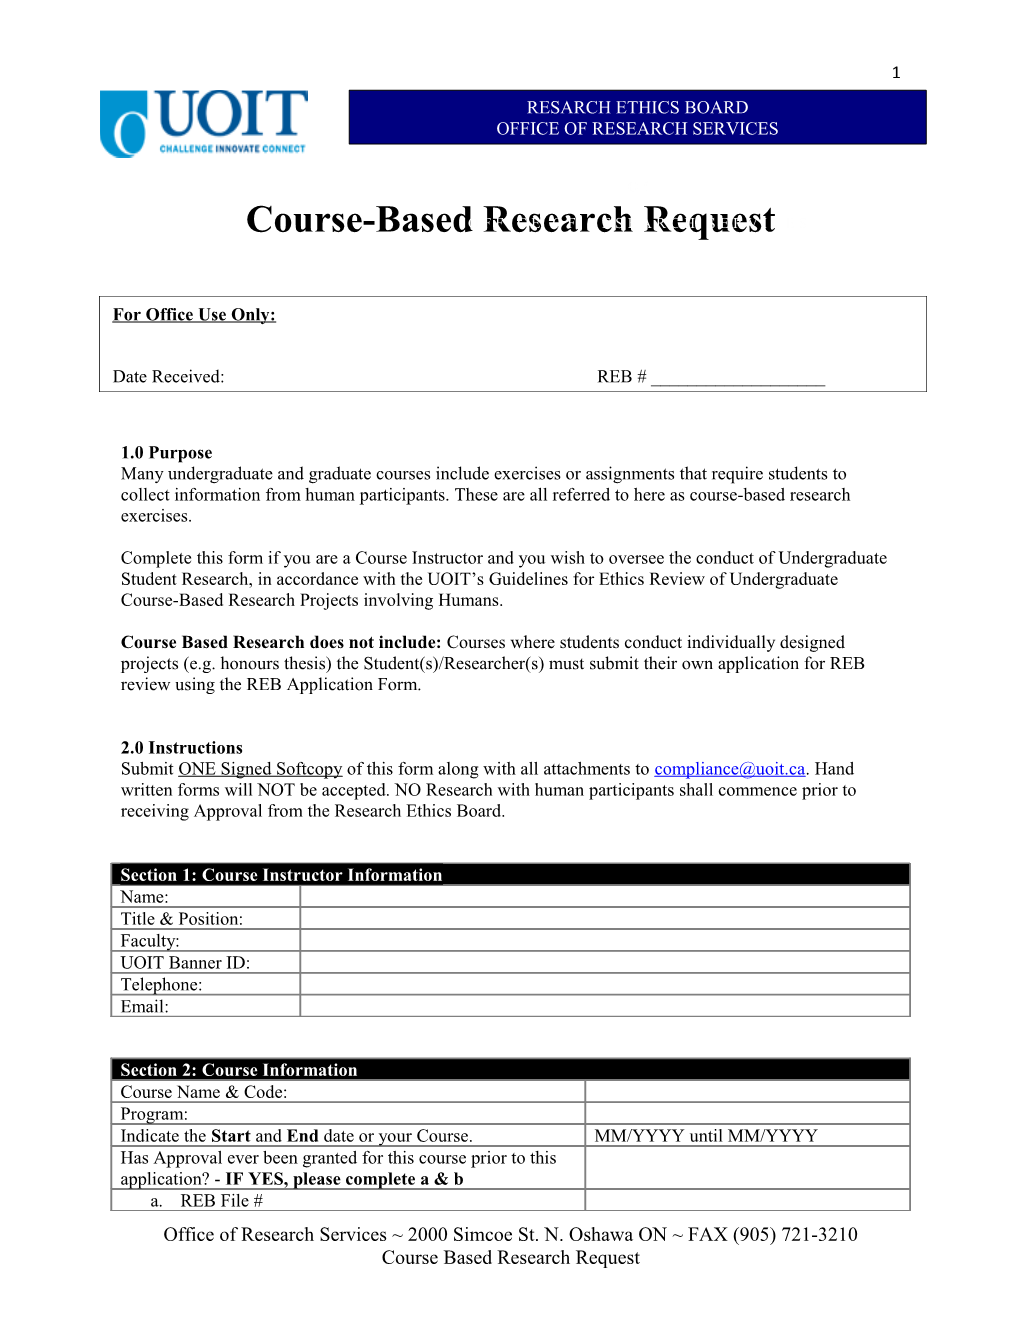 Course-Based Research Request